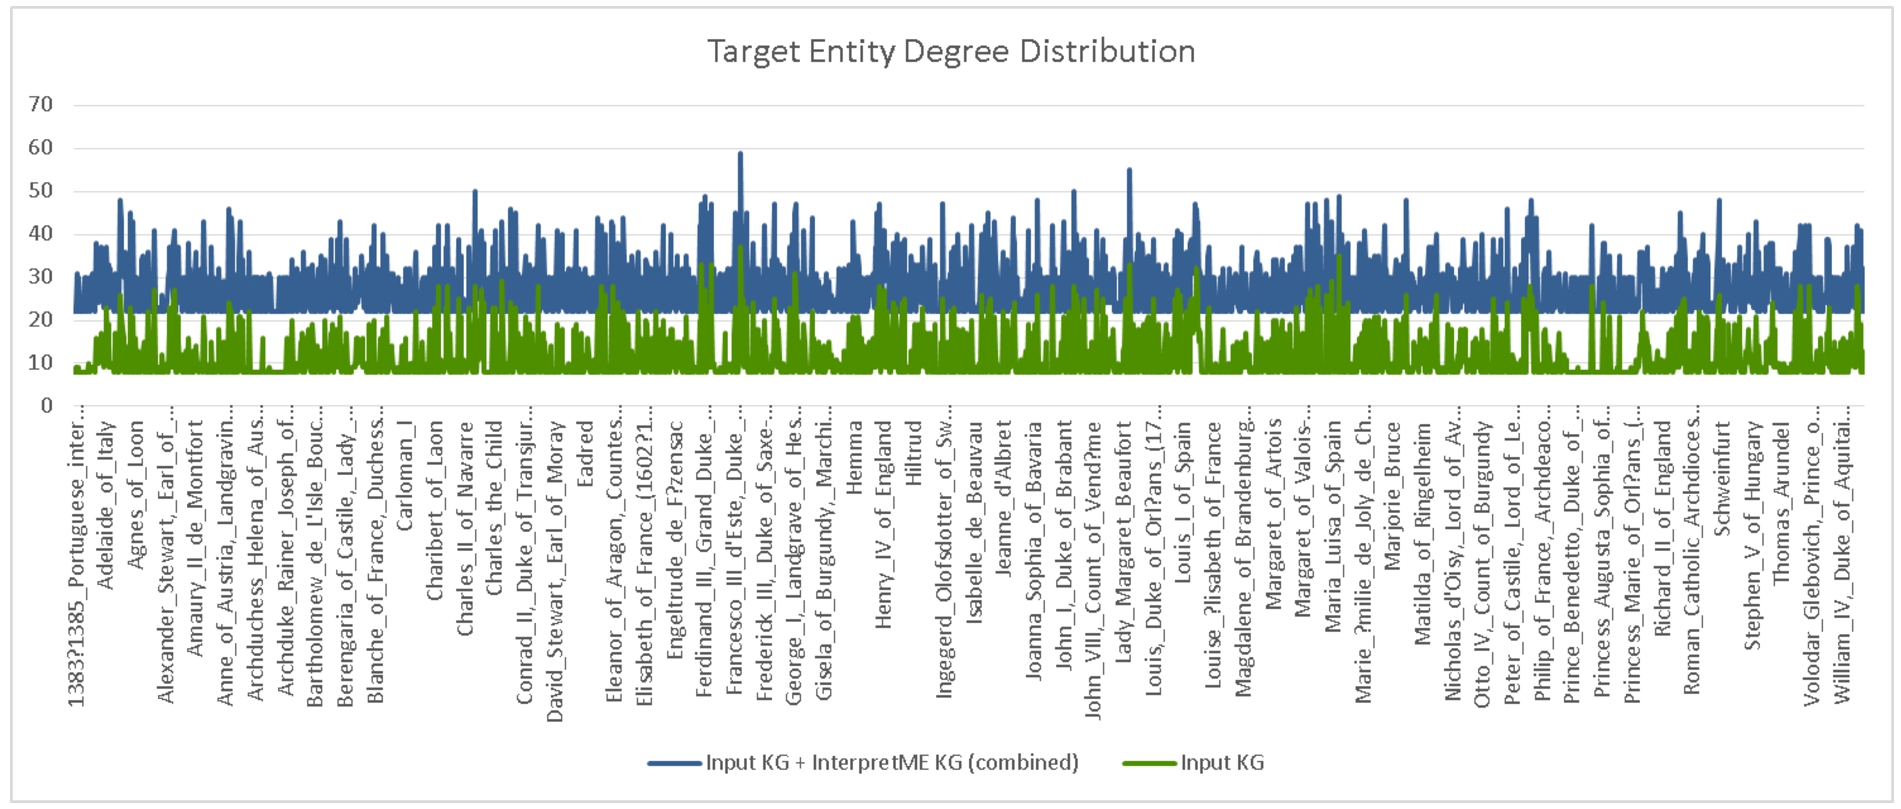 Degree distributions of the entity targets in the French royalty KG. The distribution in blue depicts the degrees of the target entities semantically enhanced with InterpretME, while green shows their original degree distribution.